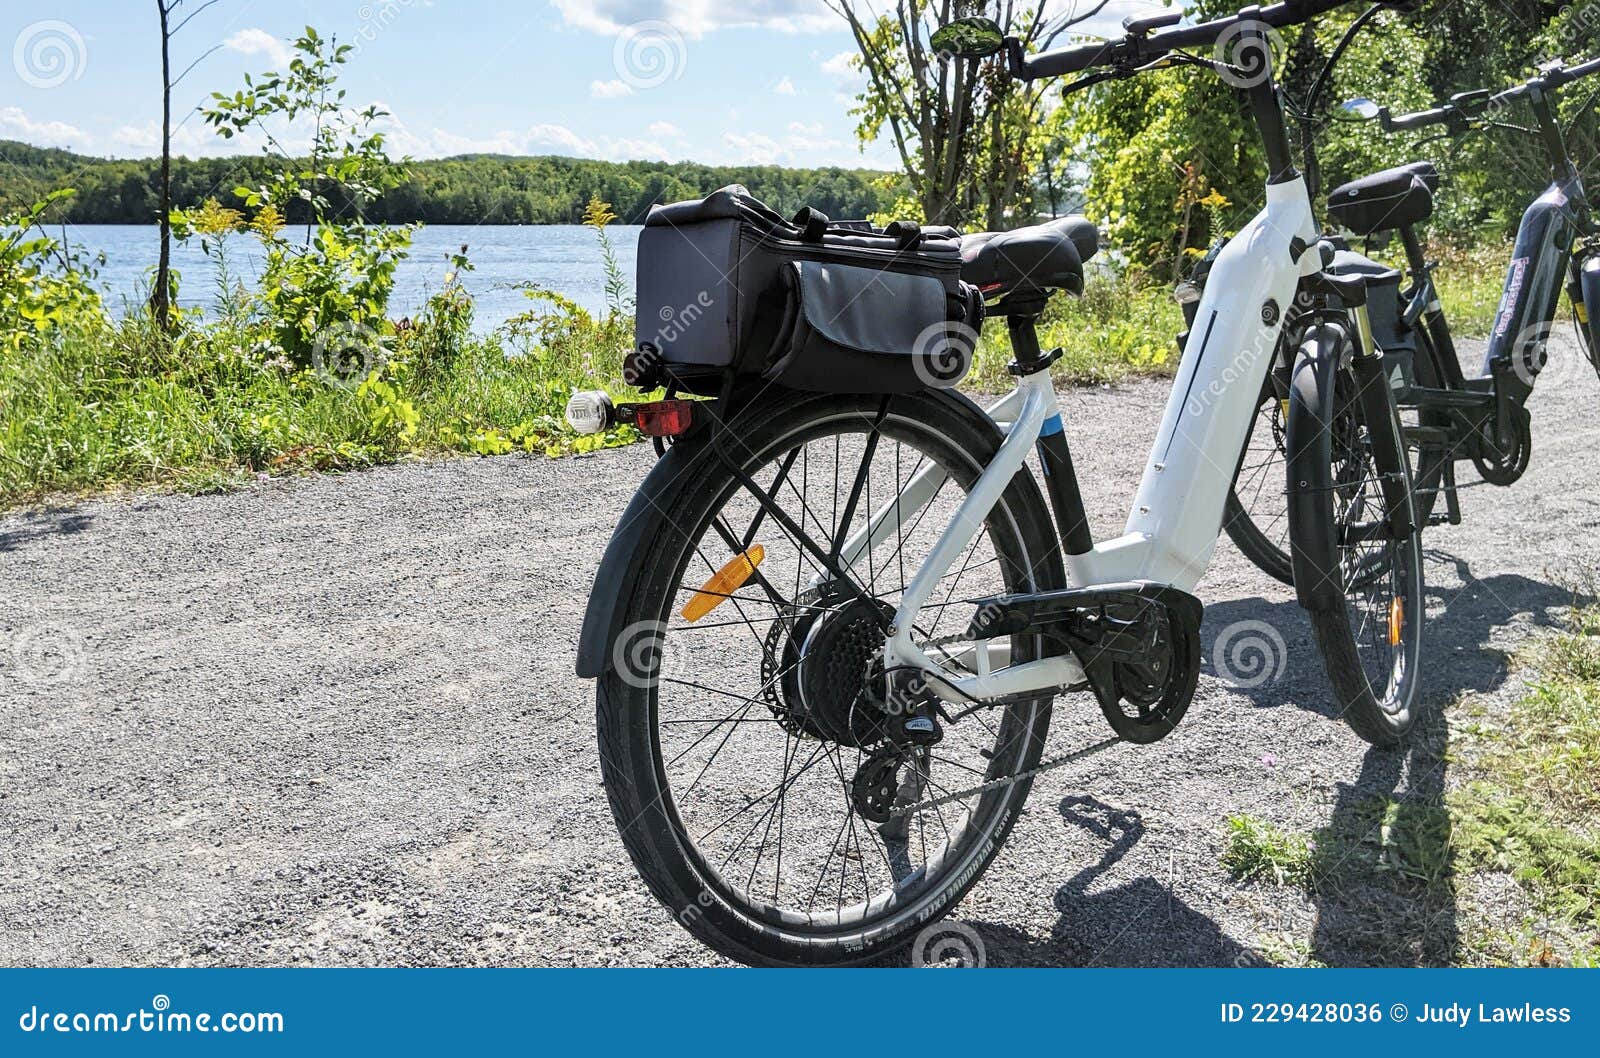 two e-bikes on a trail beside a river